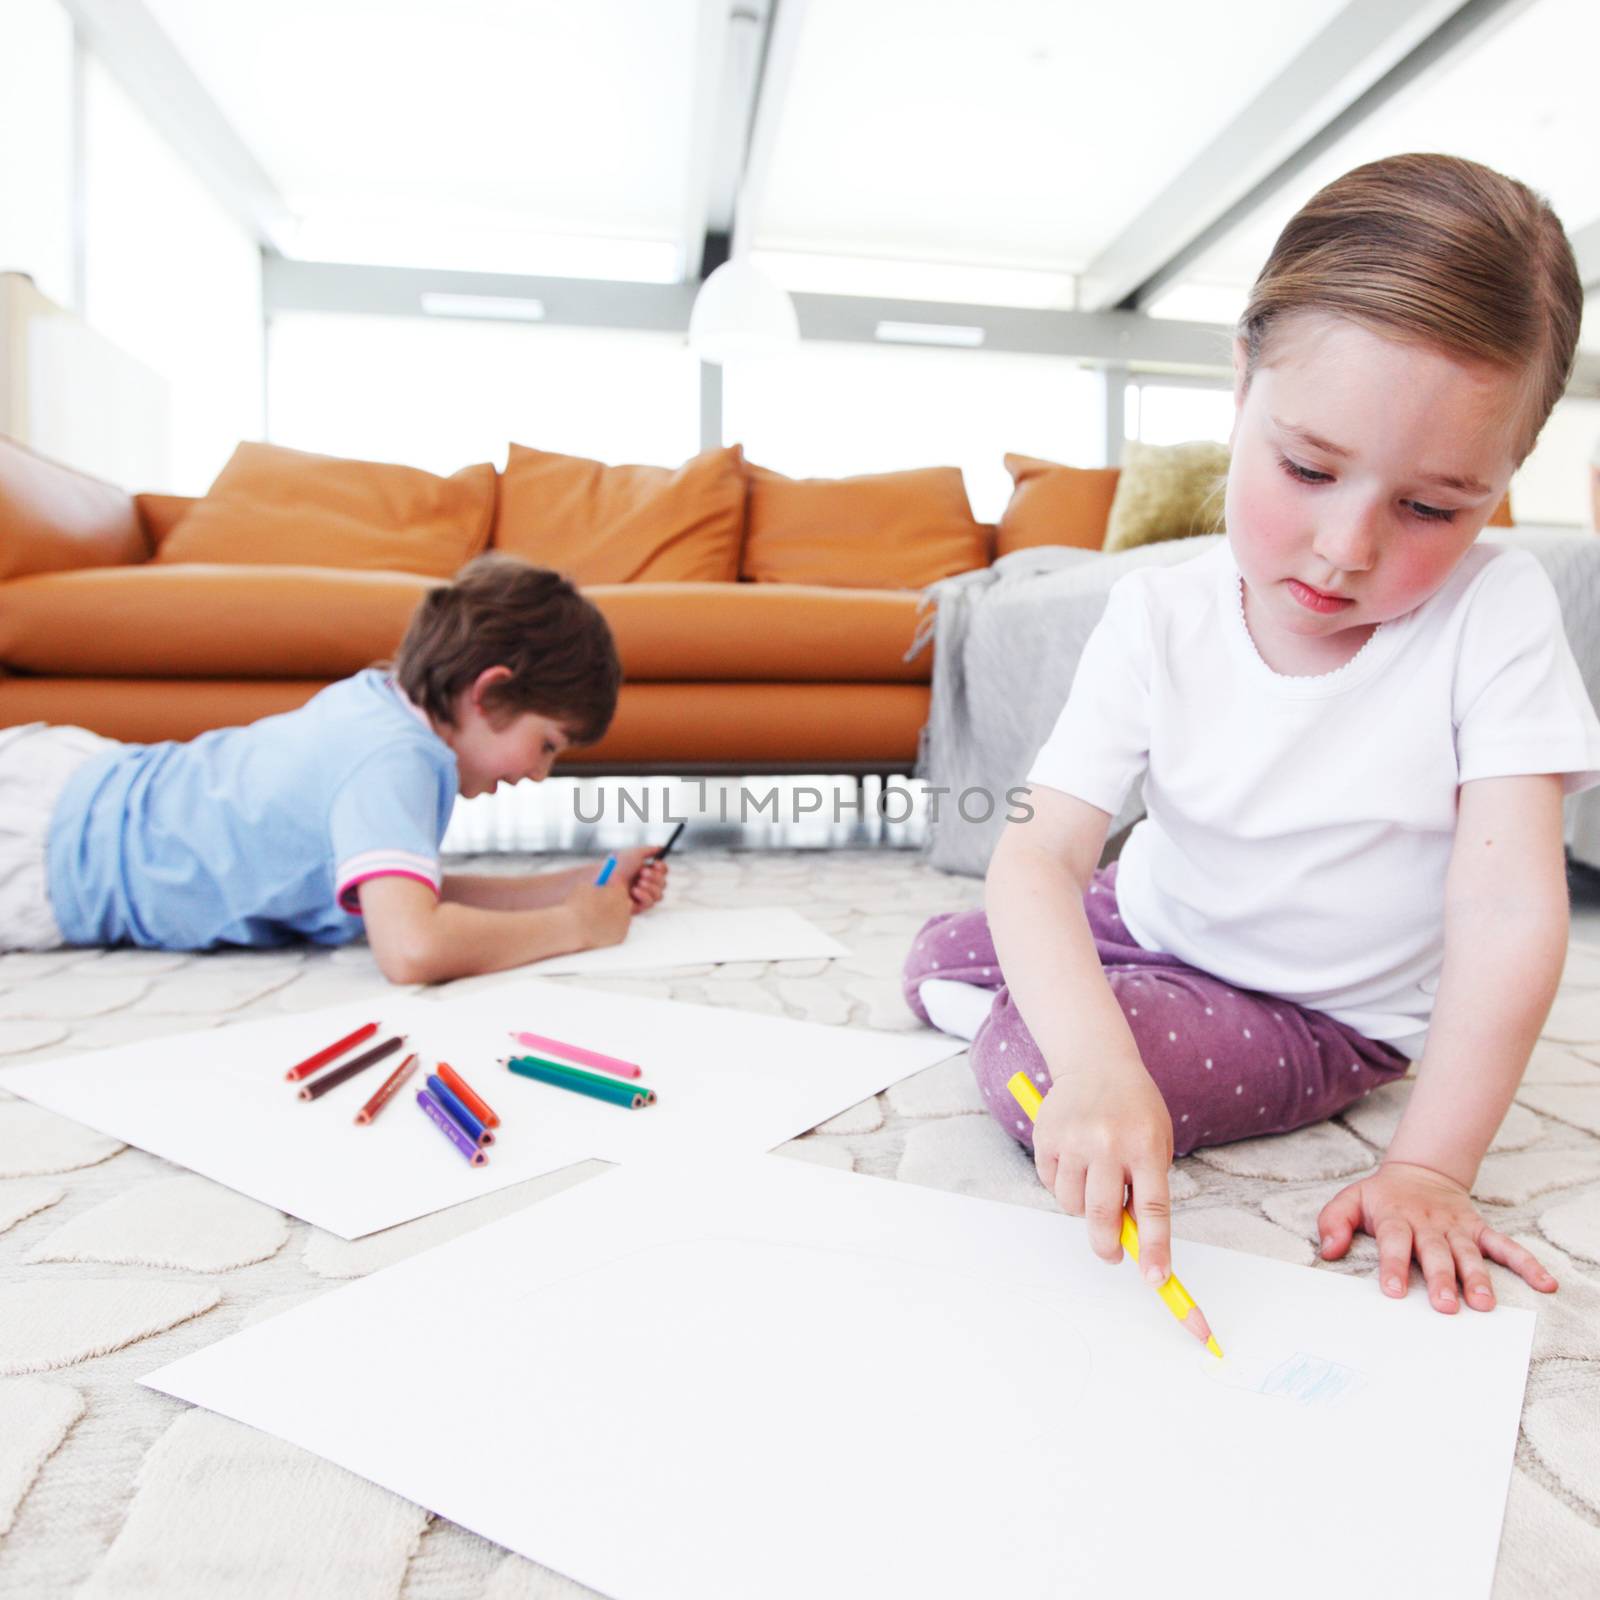 brother and sister drawing pictures with coloring pencils